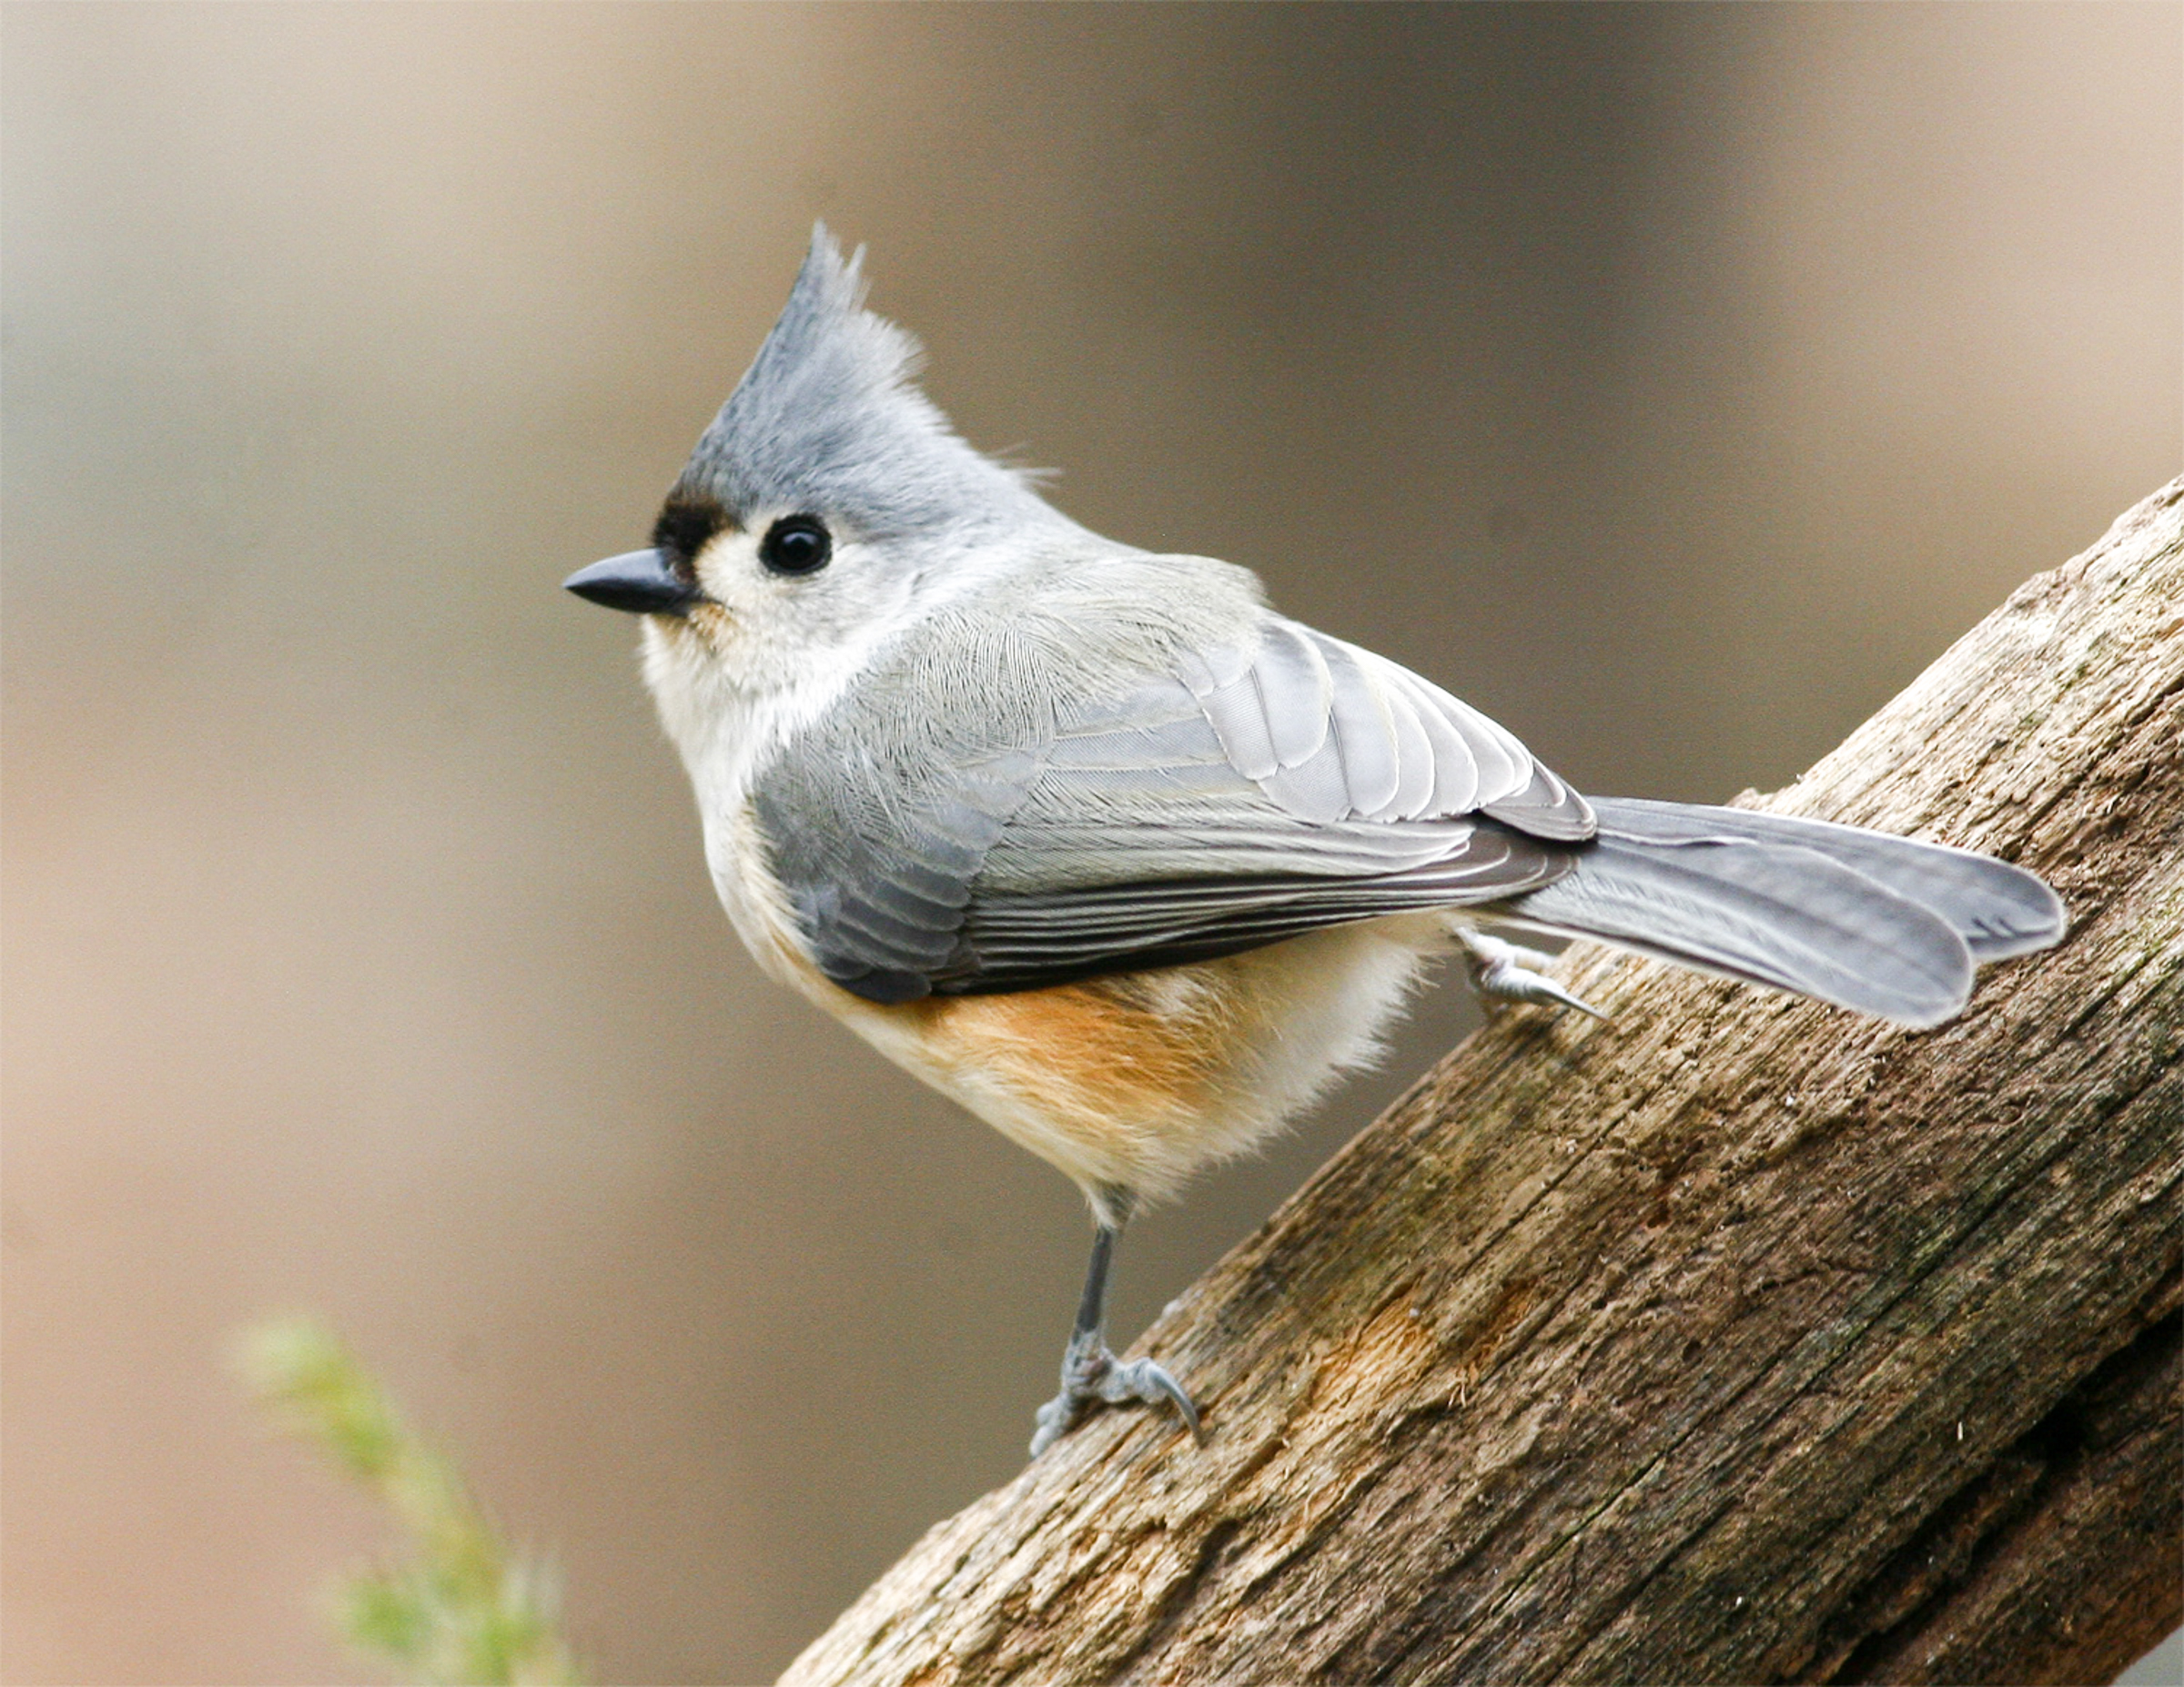 Tufted Titmouse standing on a branch.